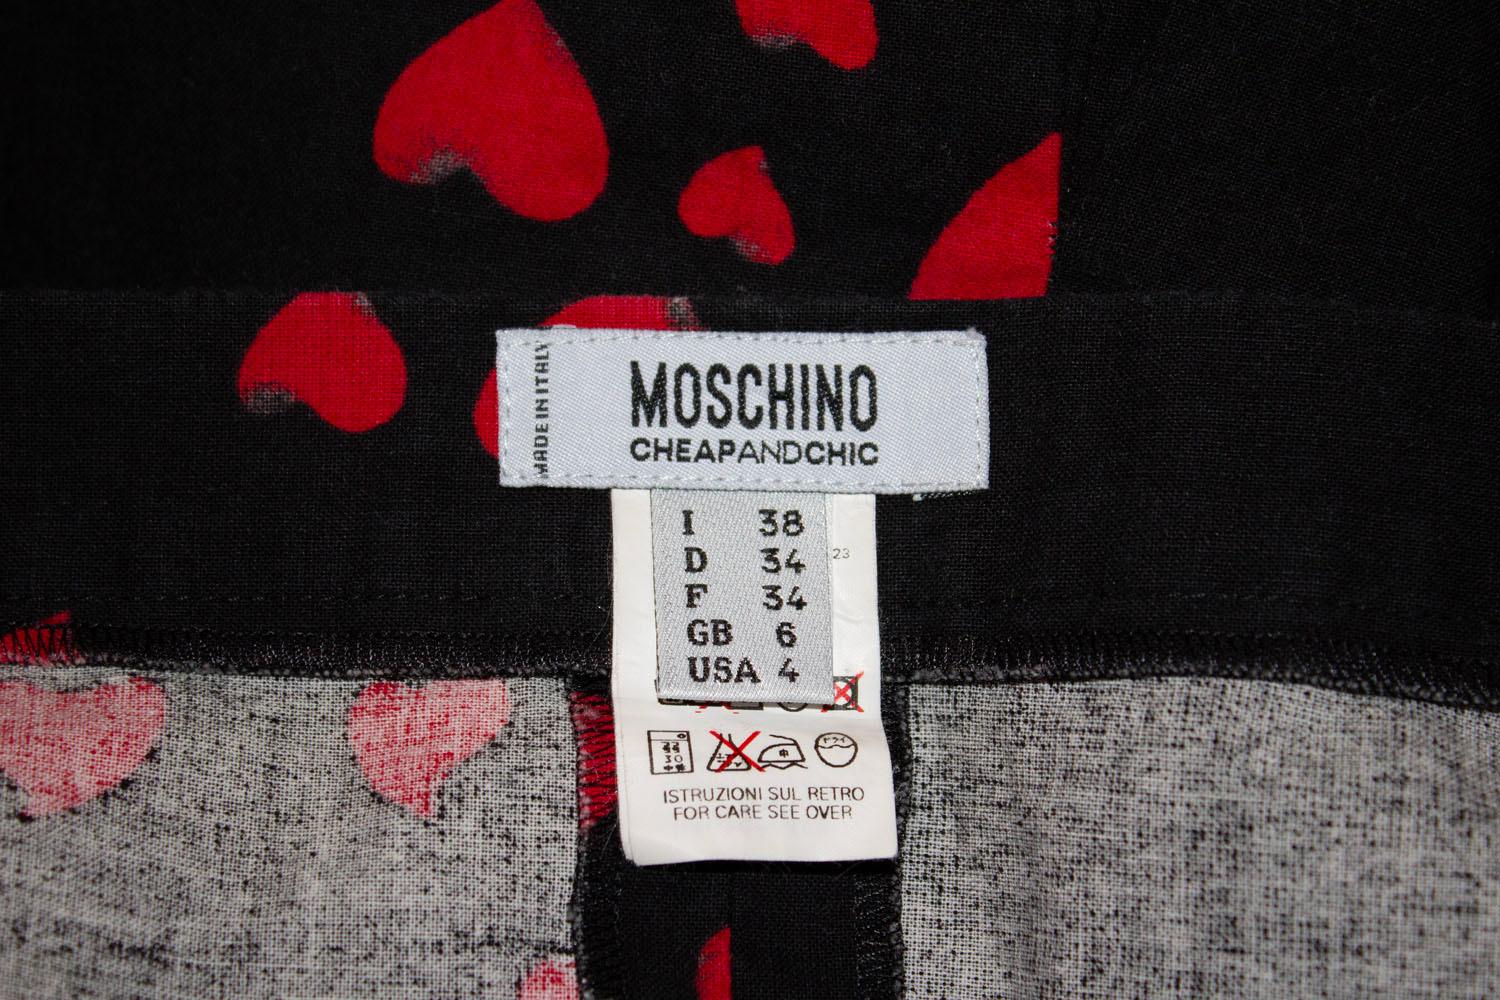 A fund and flirty skirt for Spring / Summer by Moschino, Cheap and Chic line.  The cotton skirt has a black background with a red heart print. It has a back central zip opening and is unlined.
Made in Italy , Size UK 6
Measurements:  waist 27'',